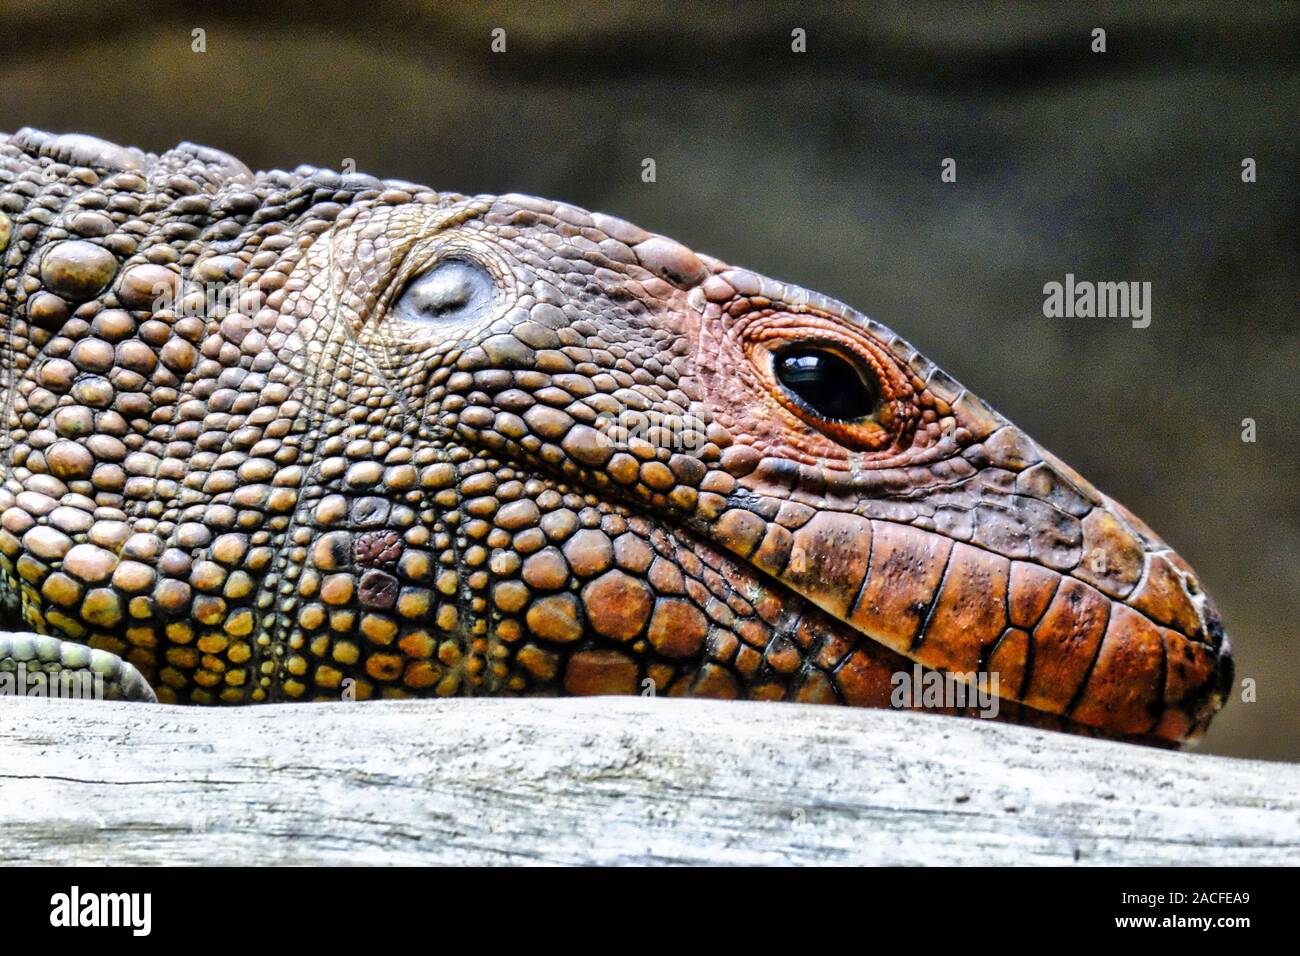 The caiman lizard is a semi-aquatic species named for its large, heavy scales that resemble those of the caiman crocodile. Stock Photo